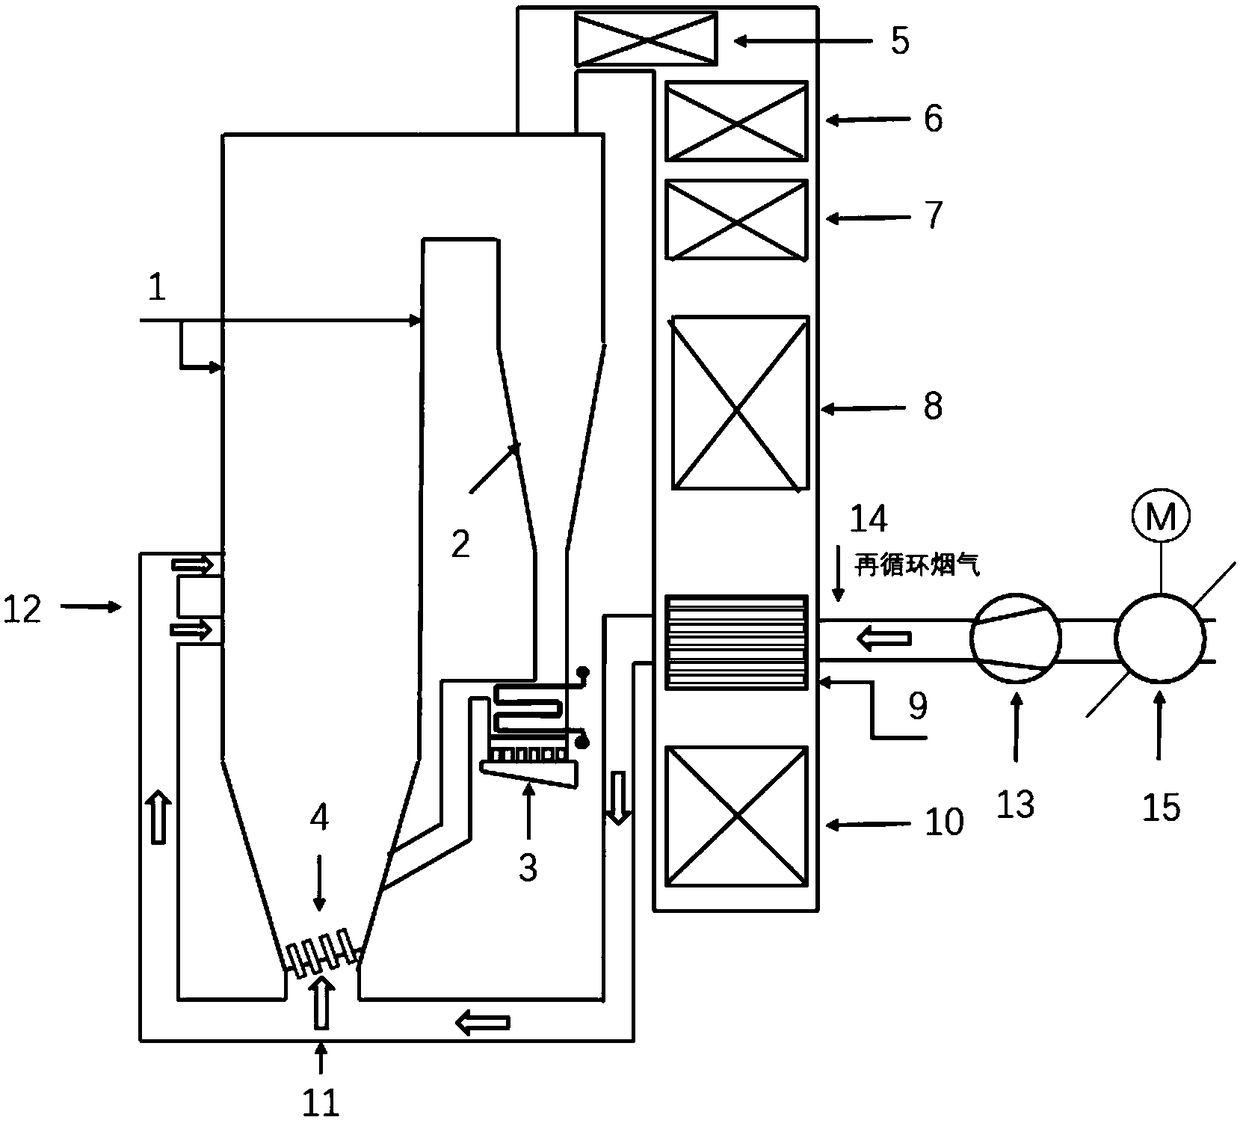 Circulating fluidized bed boiler applicable to garbage incineration